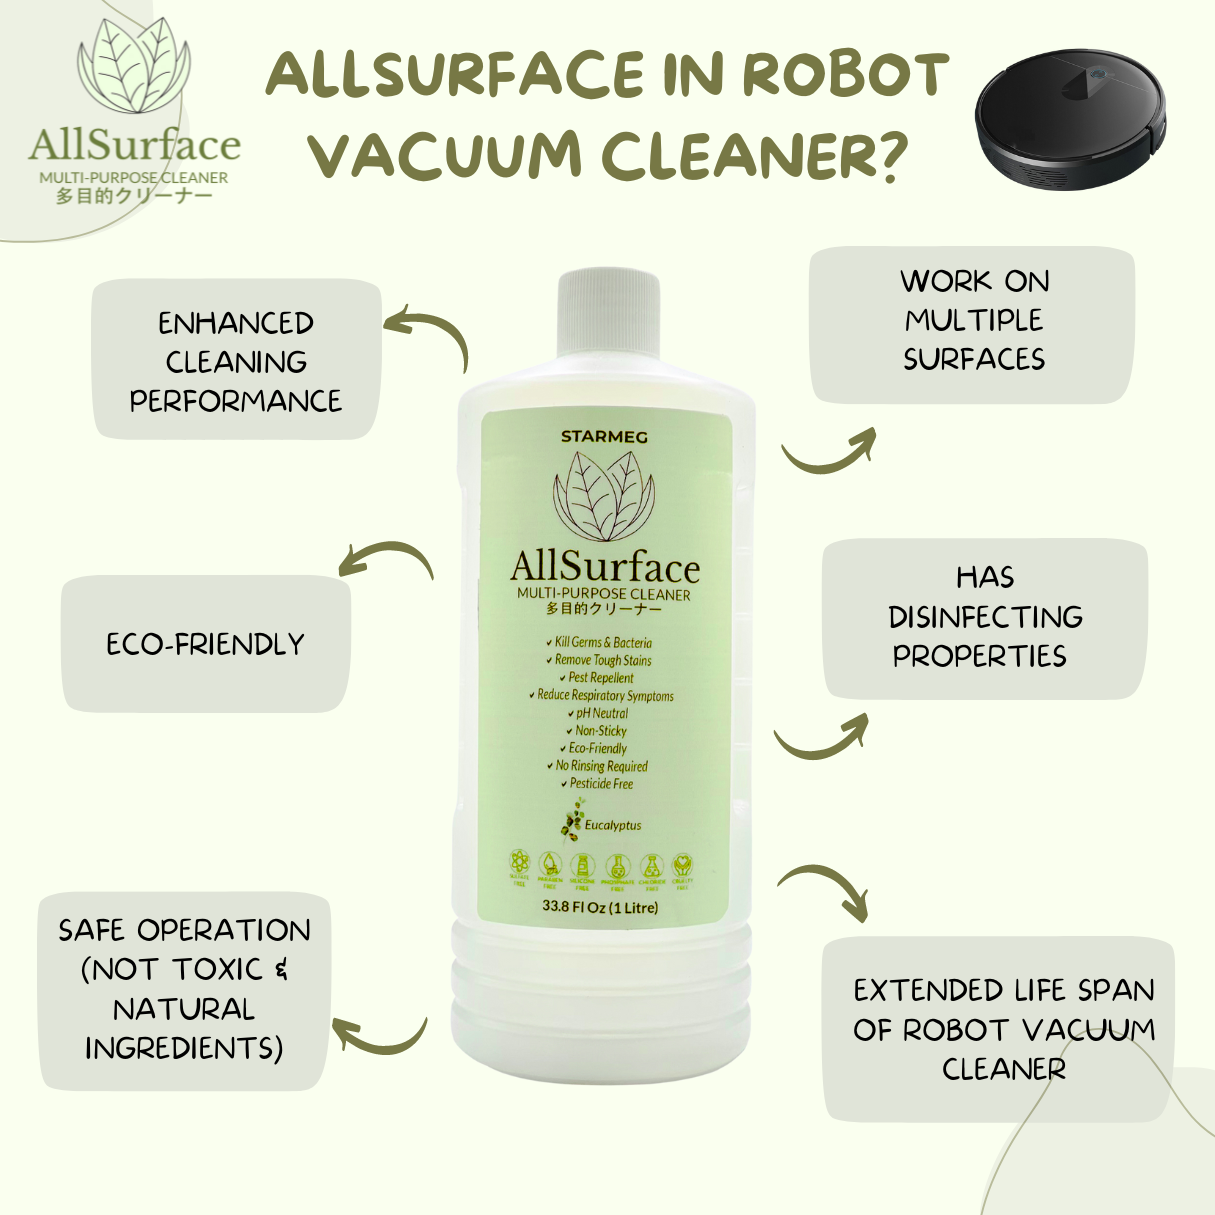 AllSurface MultiSurface Liquid Detergent Use in All Types Robot